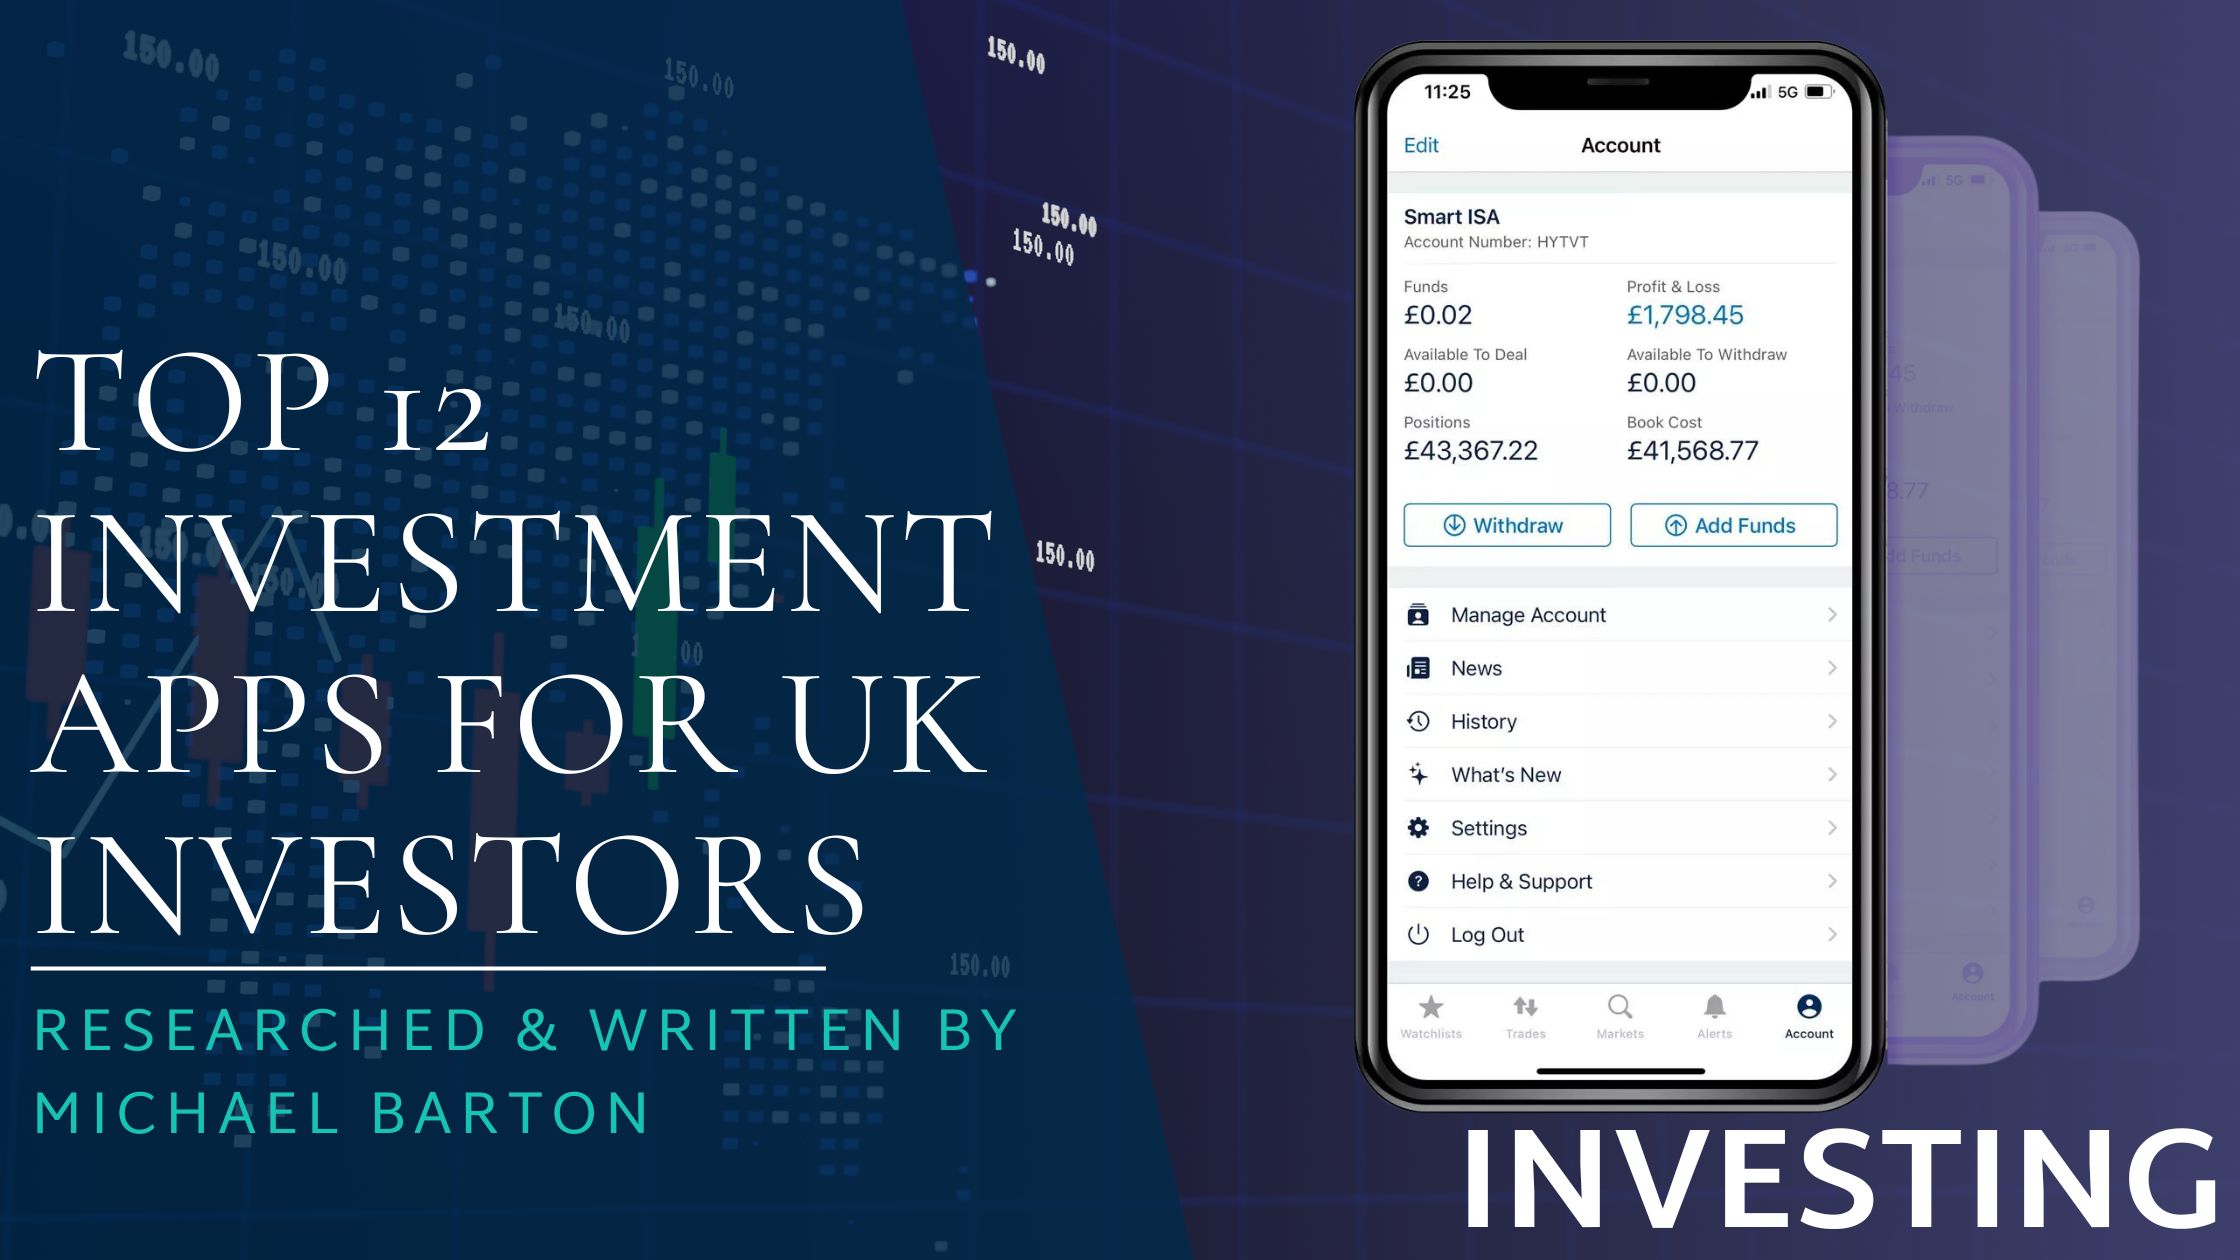 Top 12 Investment Apps For UK Investors feature image